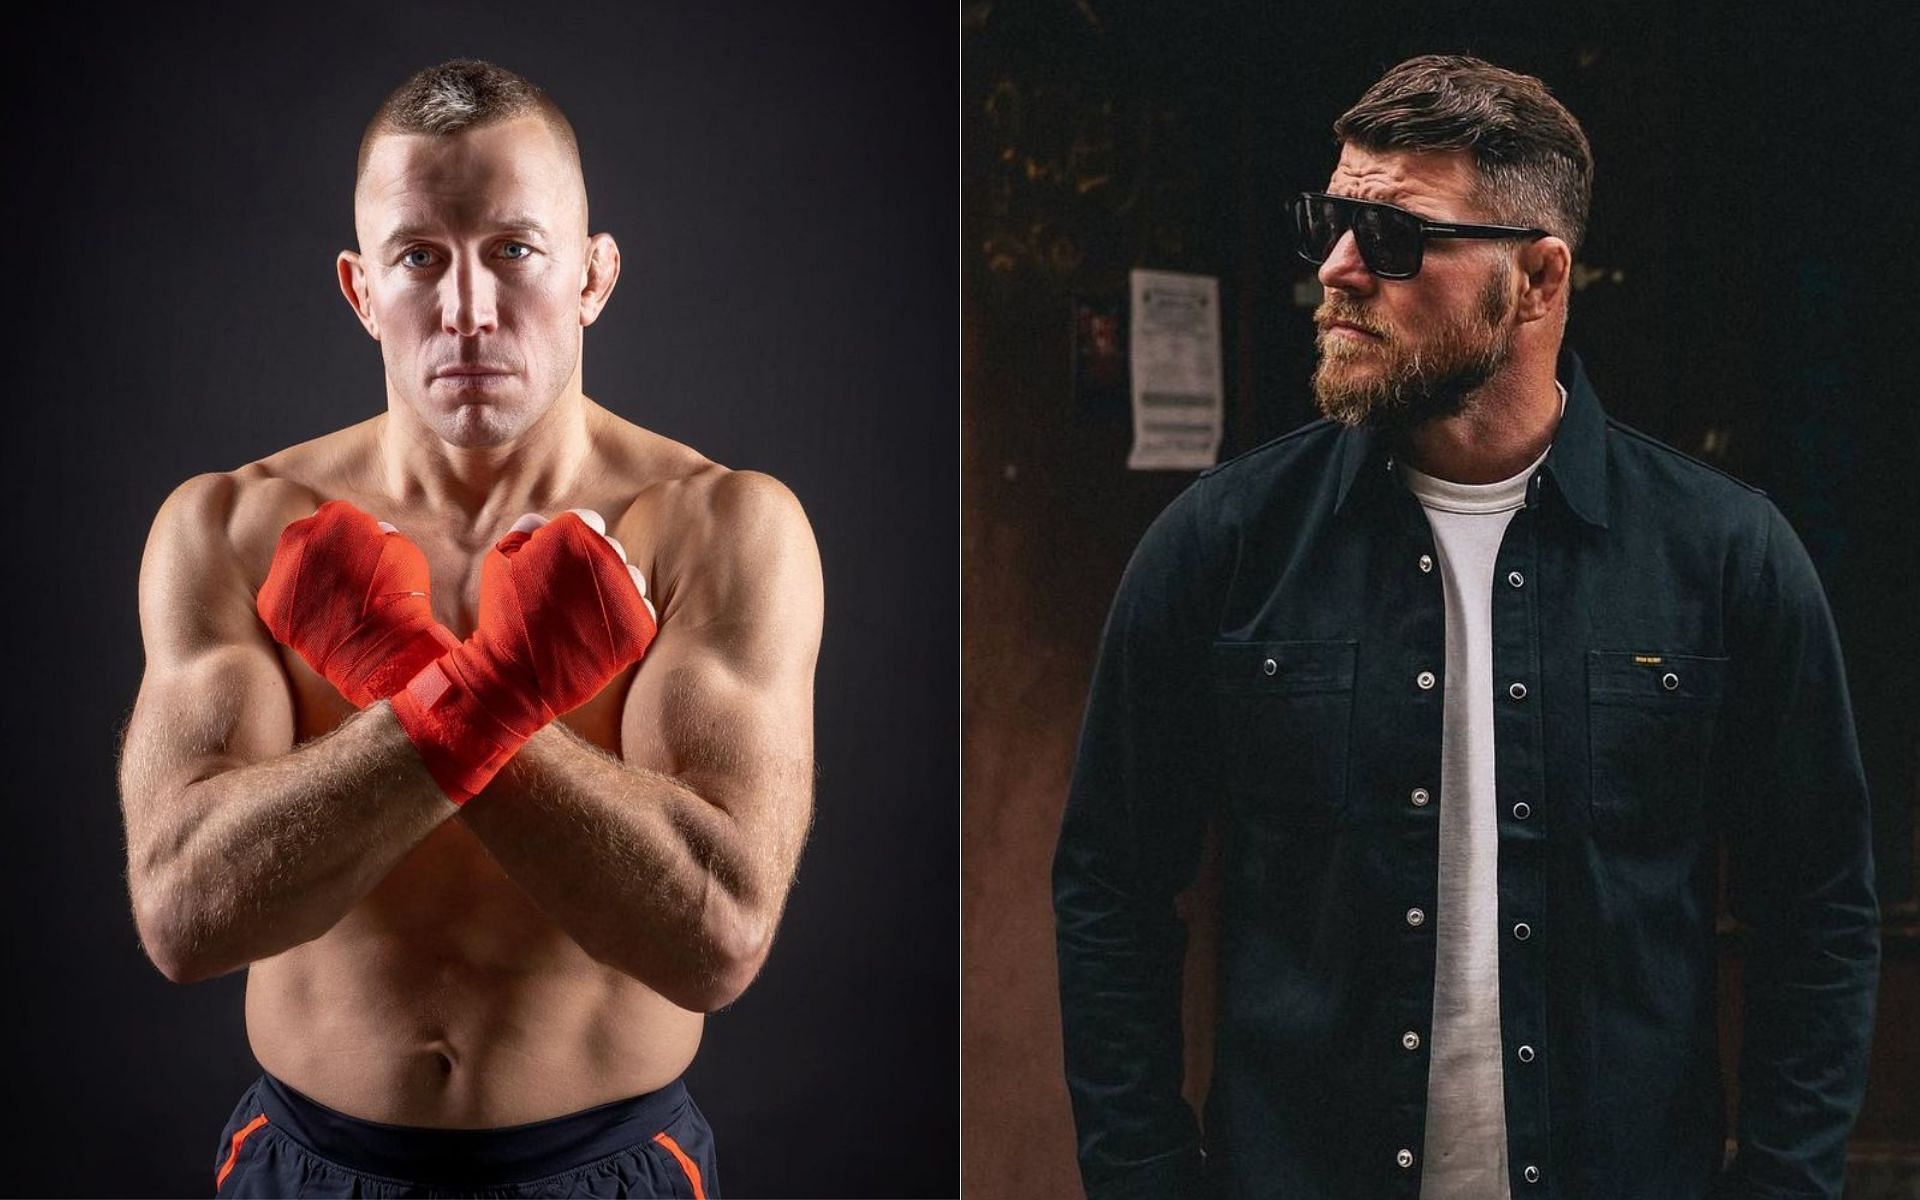 Georges St-Pierre (left) Michael Bisping (right) [Image courtesy @georgesstpierre @mikebisping on Instagram]